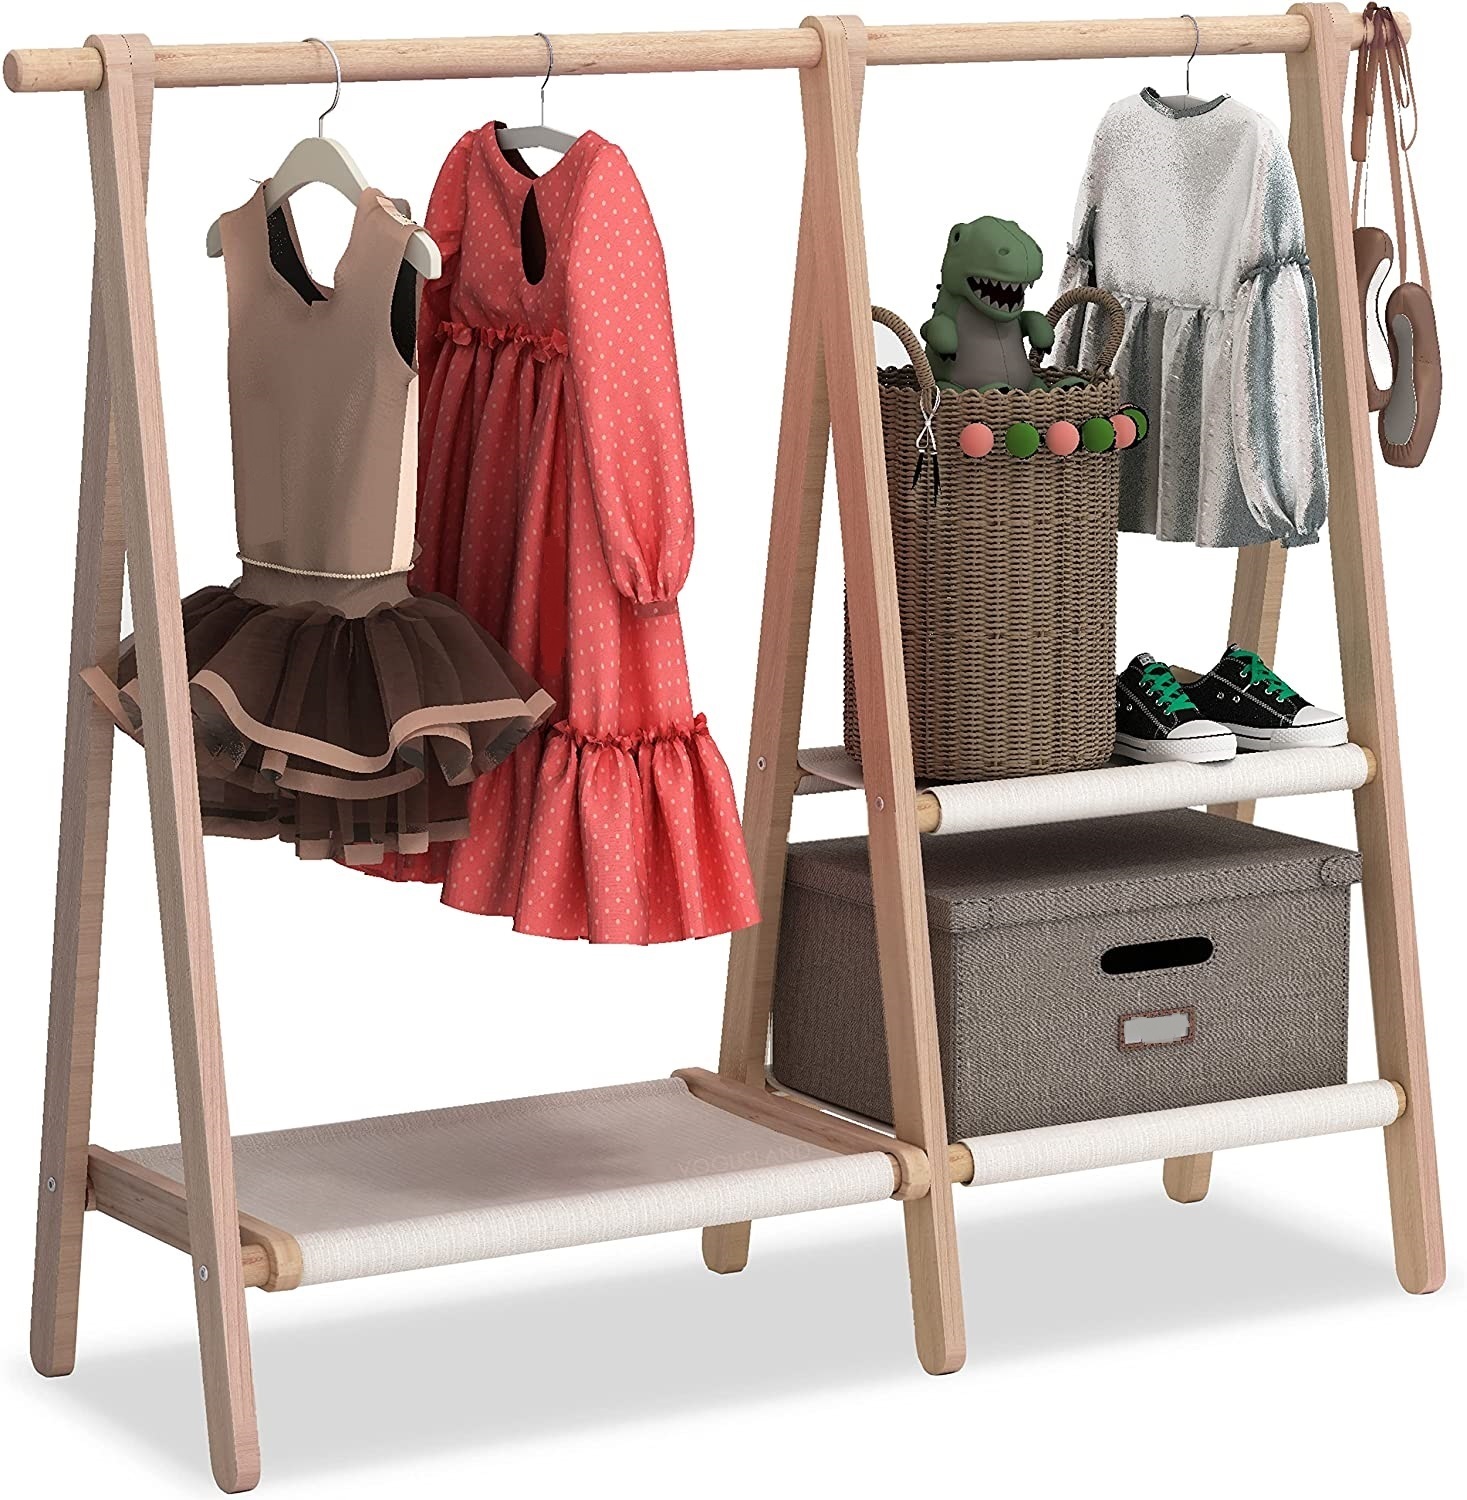 Collapsible Dress Up Storage Rack